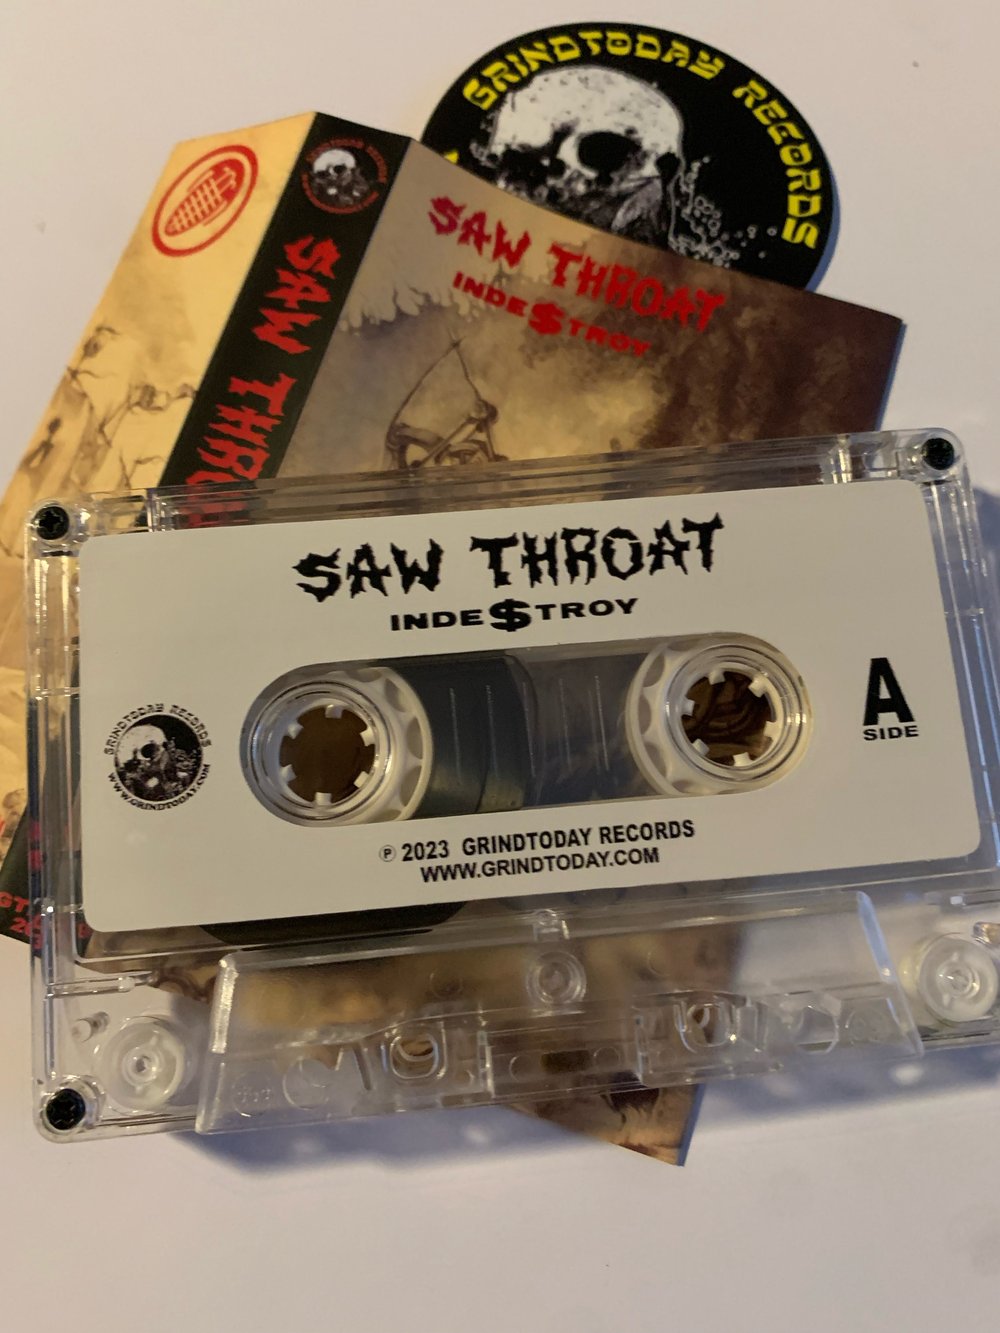 SAW THROAT ‘Inde$troy’ cassette